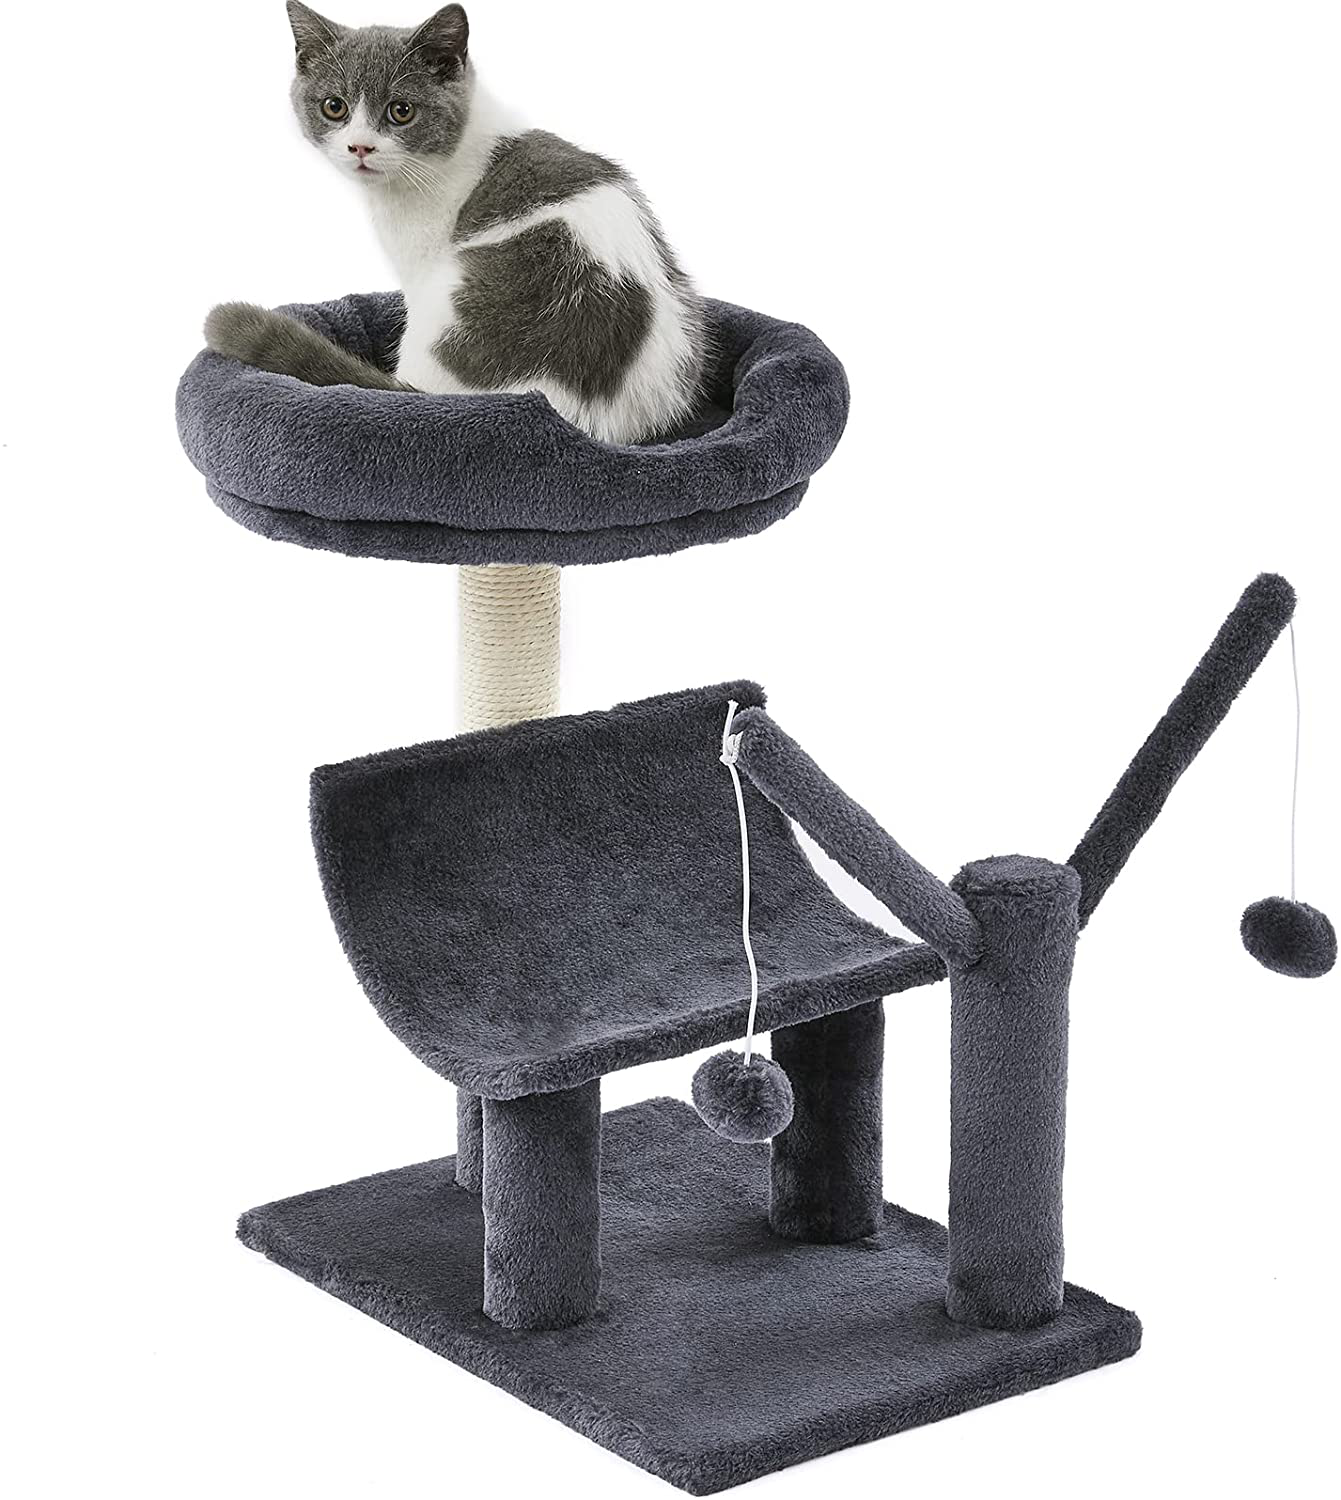 SUPERJARE Cat Tree with Plush Perchs, Indoor Cat Play Tower with 2 Dangling Balls, Kitten Activity Center with Scratching Board & Posts